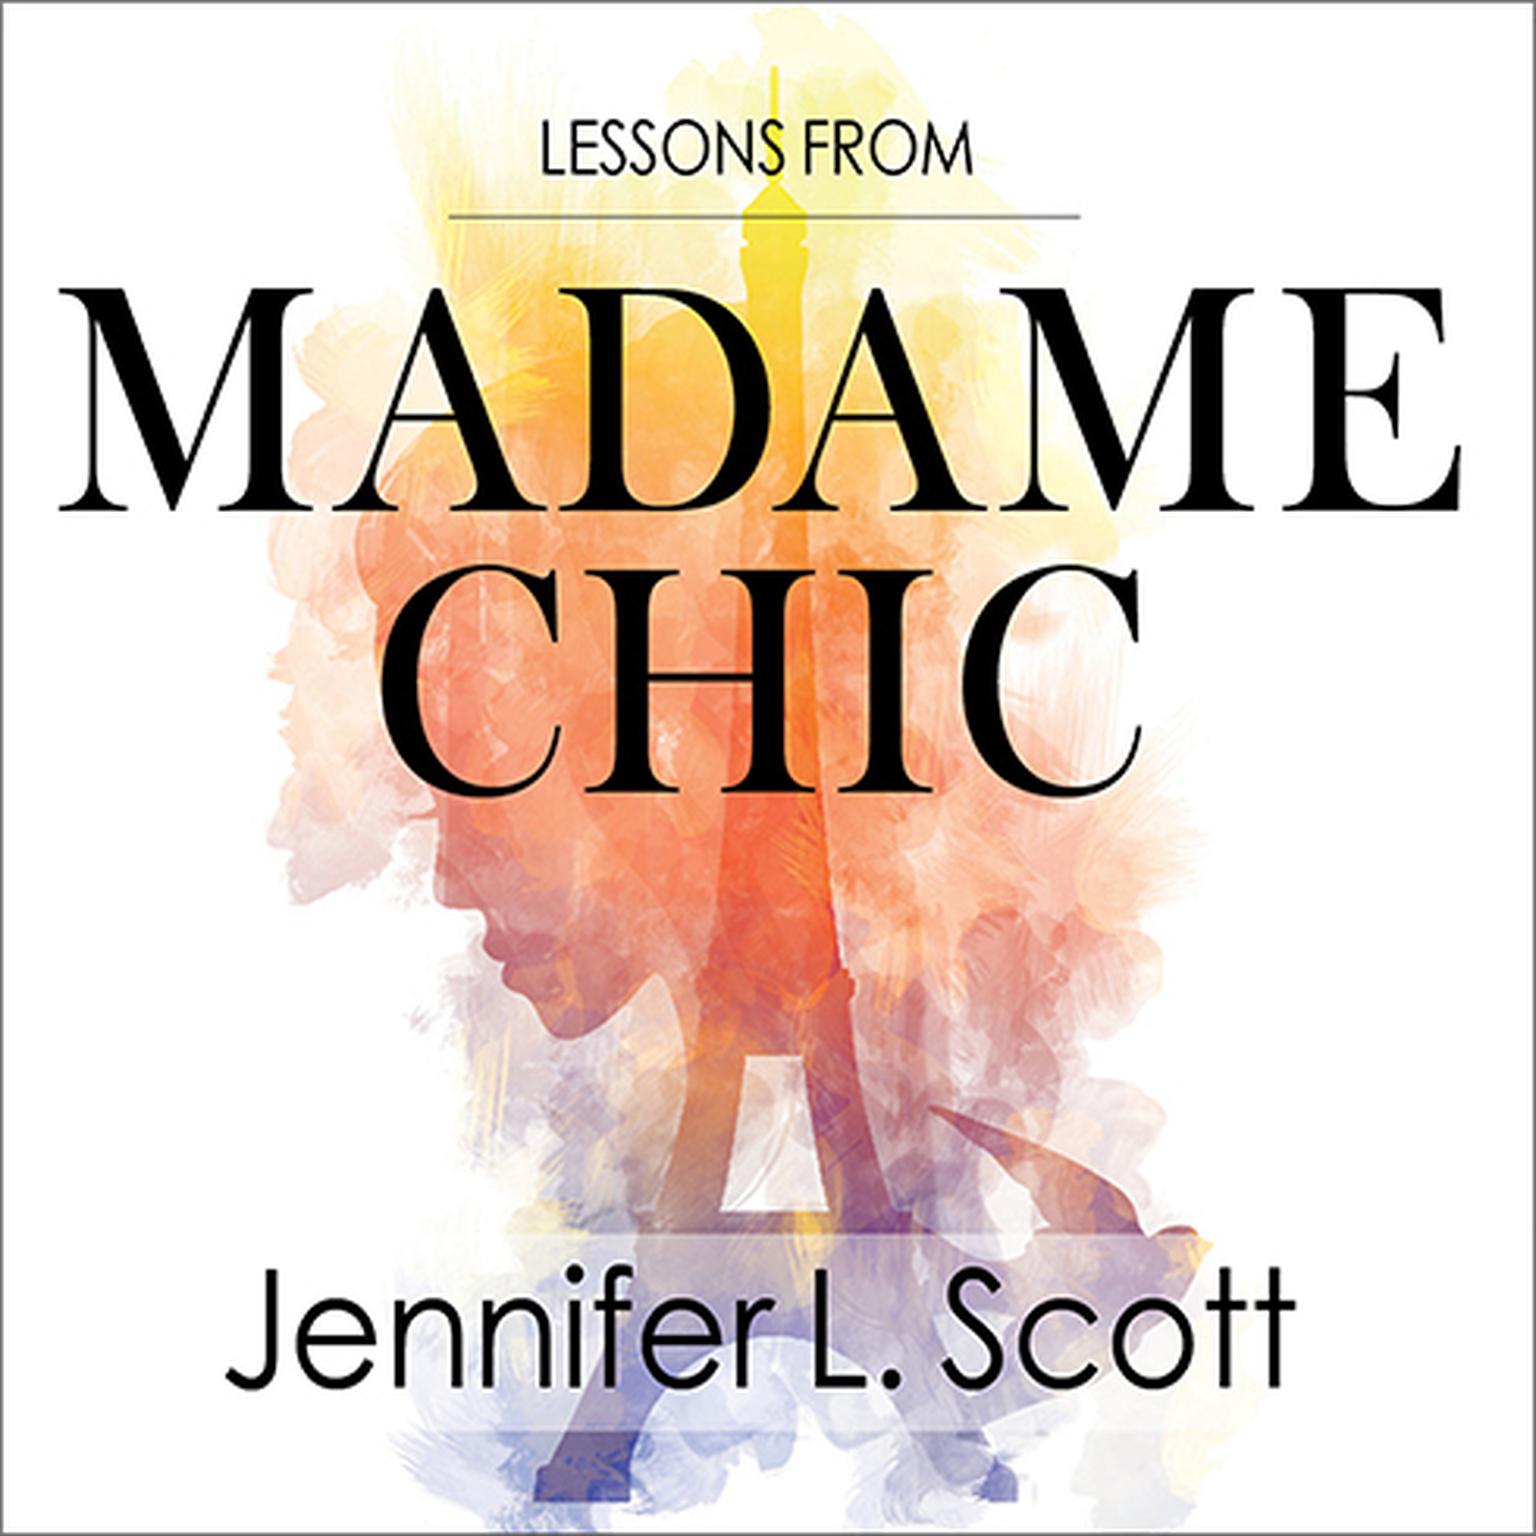 Lessons from Madame Chic: 20 Stylish Secrets I Learned While Living in Paris Audiobook, by Jennifer L. Scott